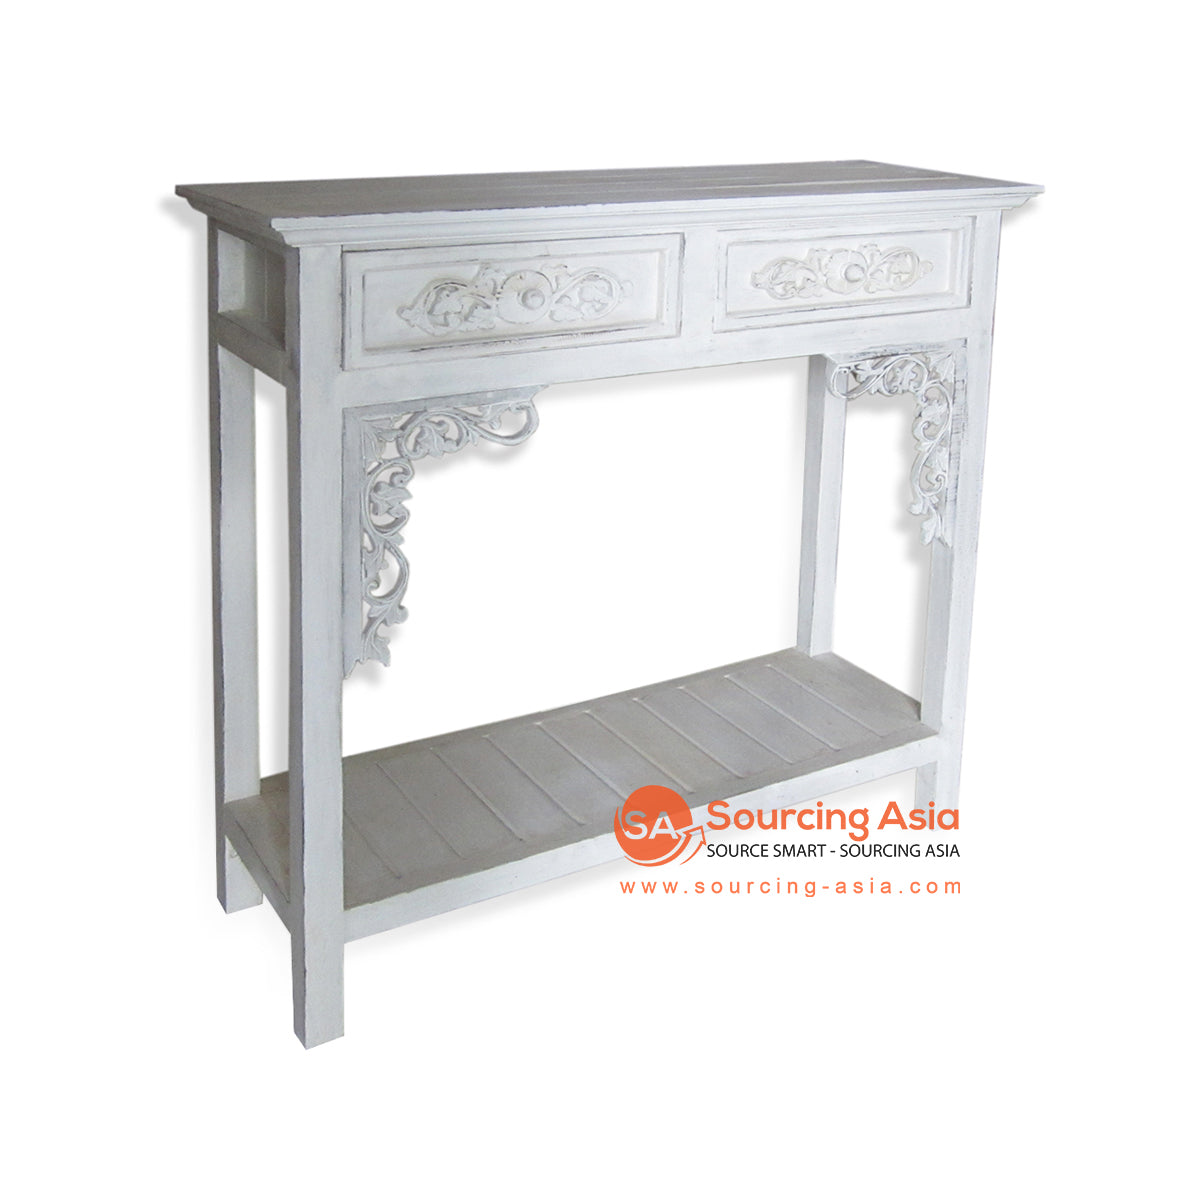 THE132WW WHITE WASH WOODEN CONSOLE TABLE WITH TWO DRAWERS